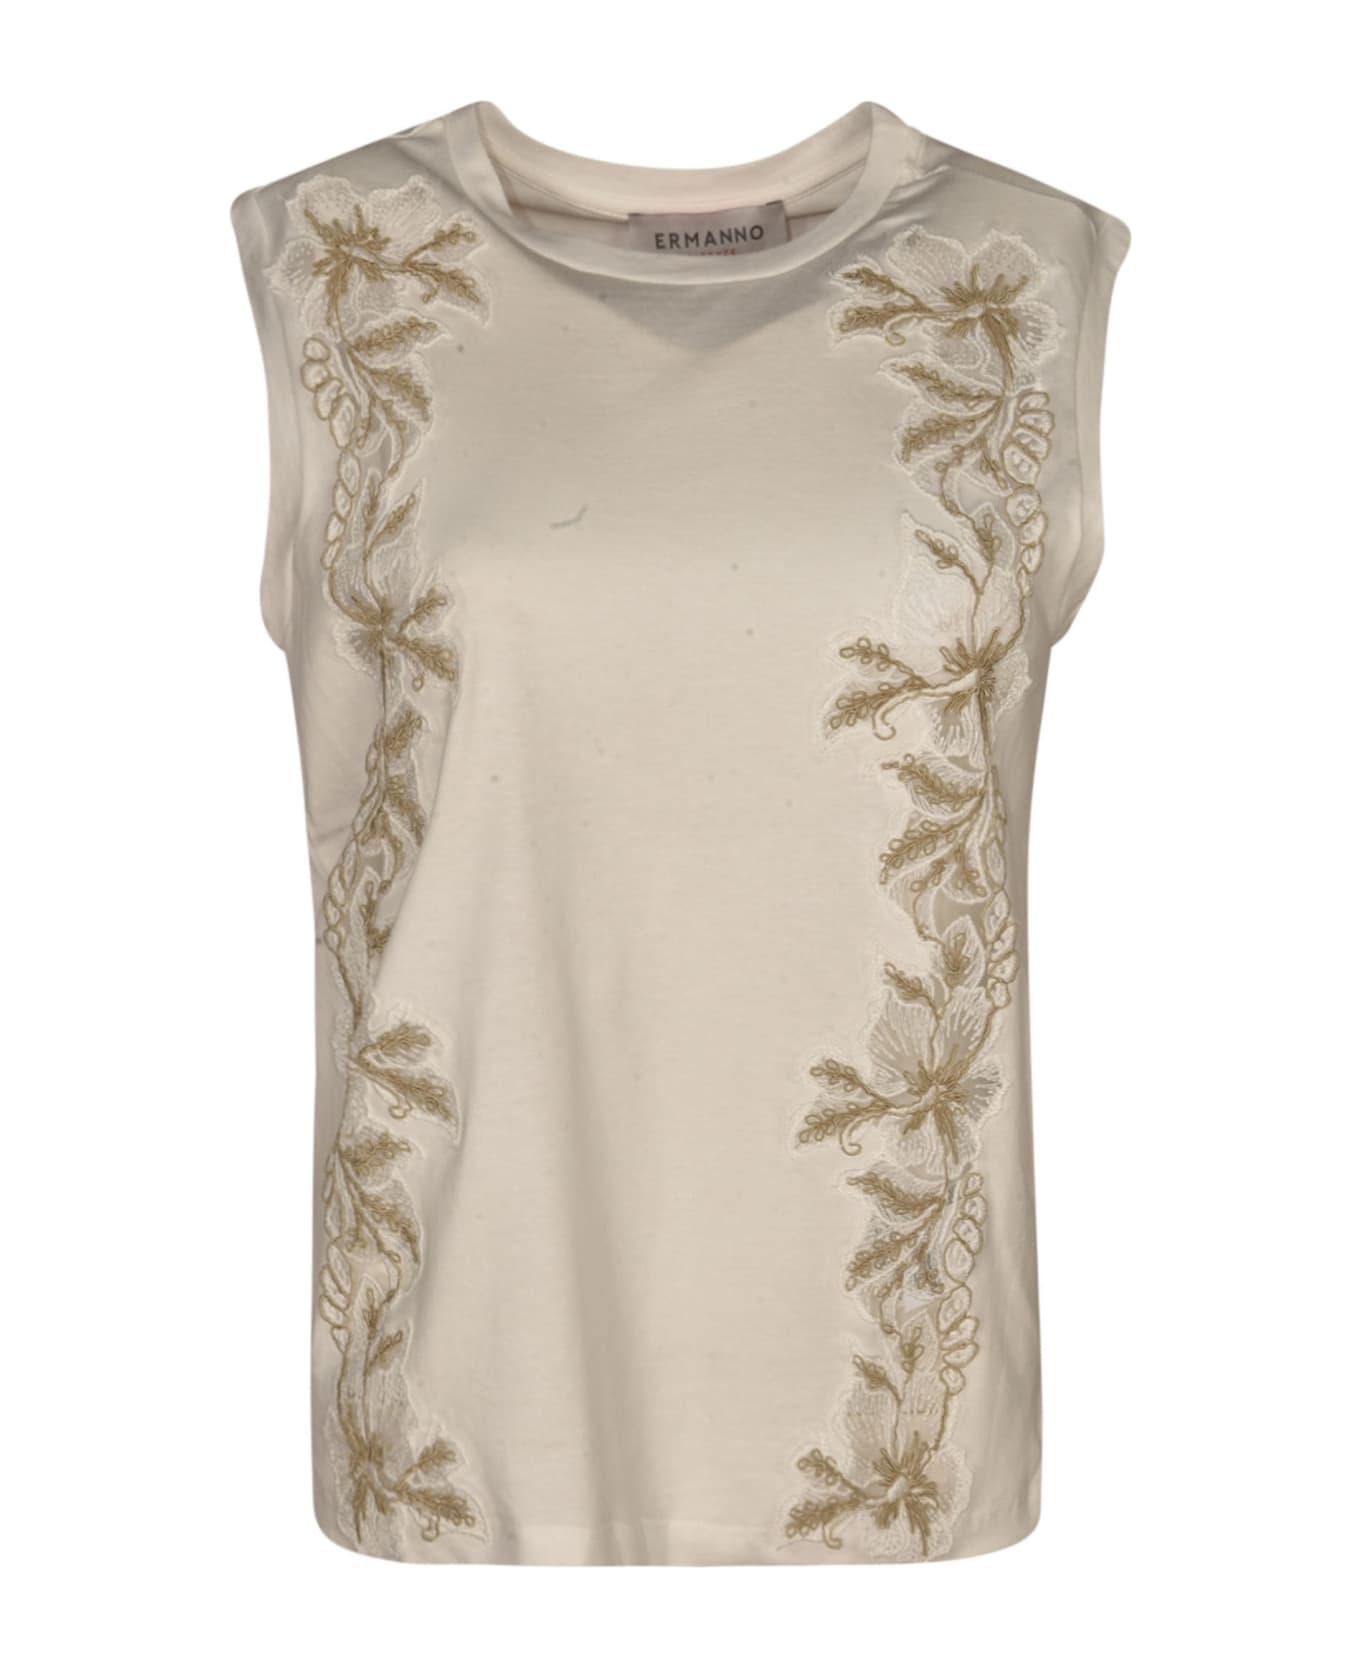 Ermanno Scervino Floral Embroidered Sleeveless Top - White